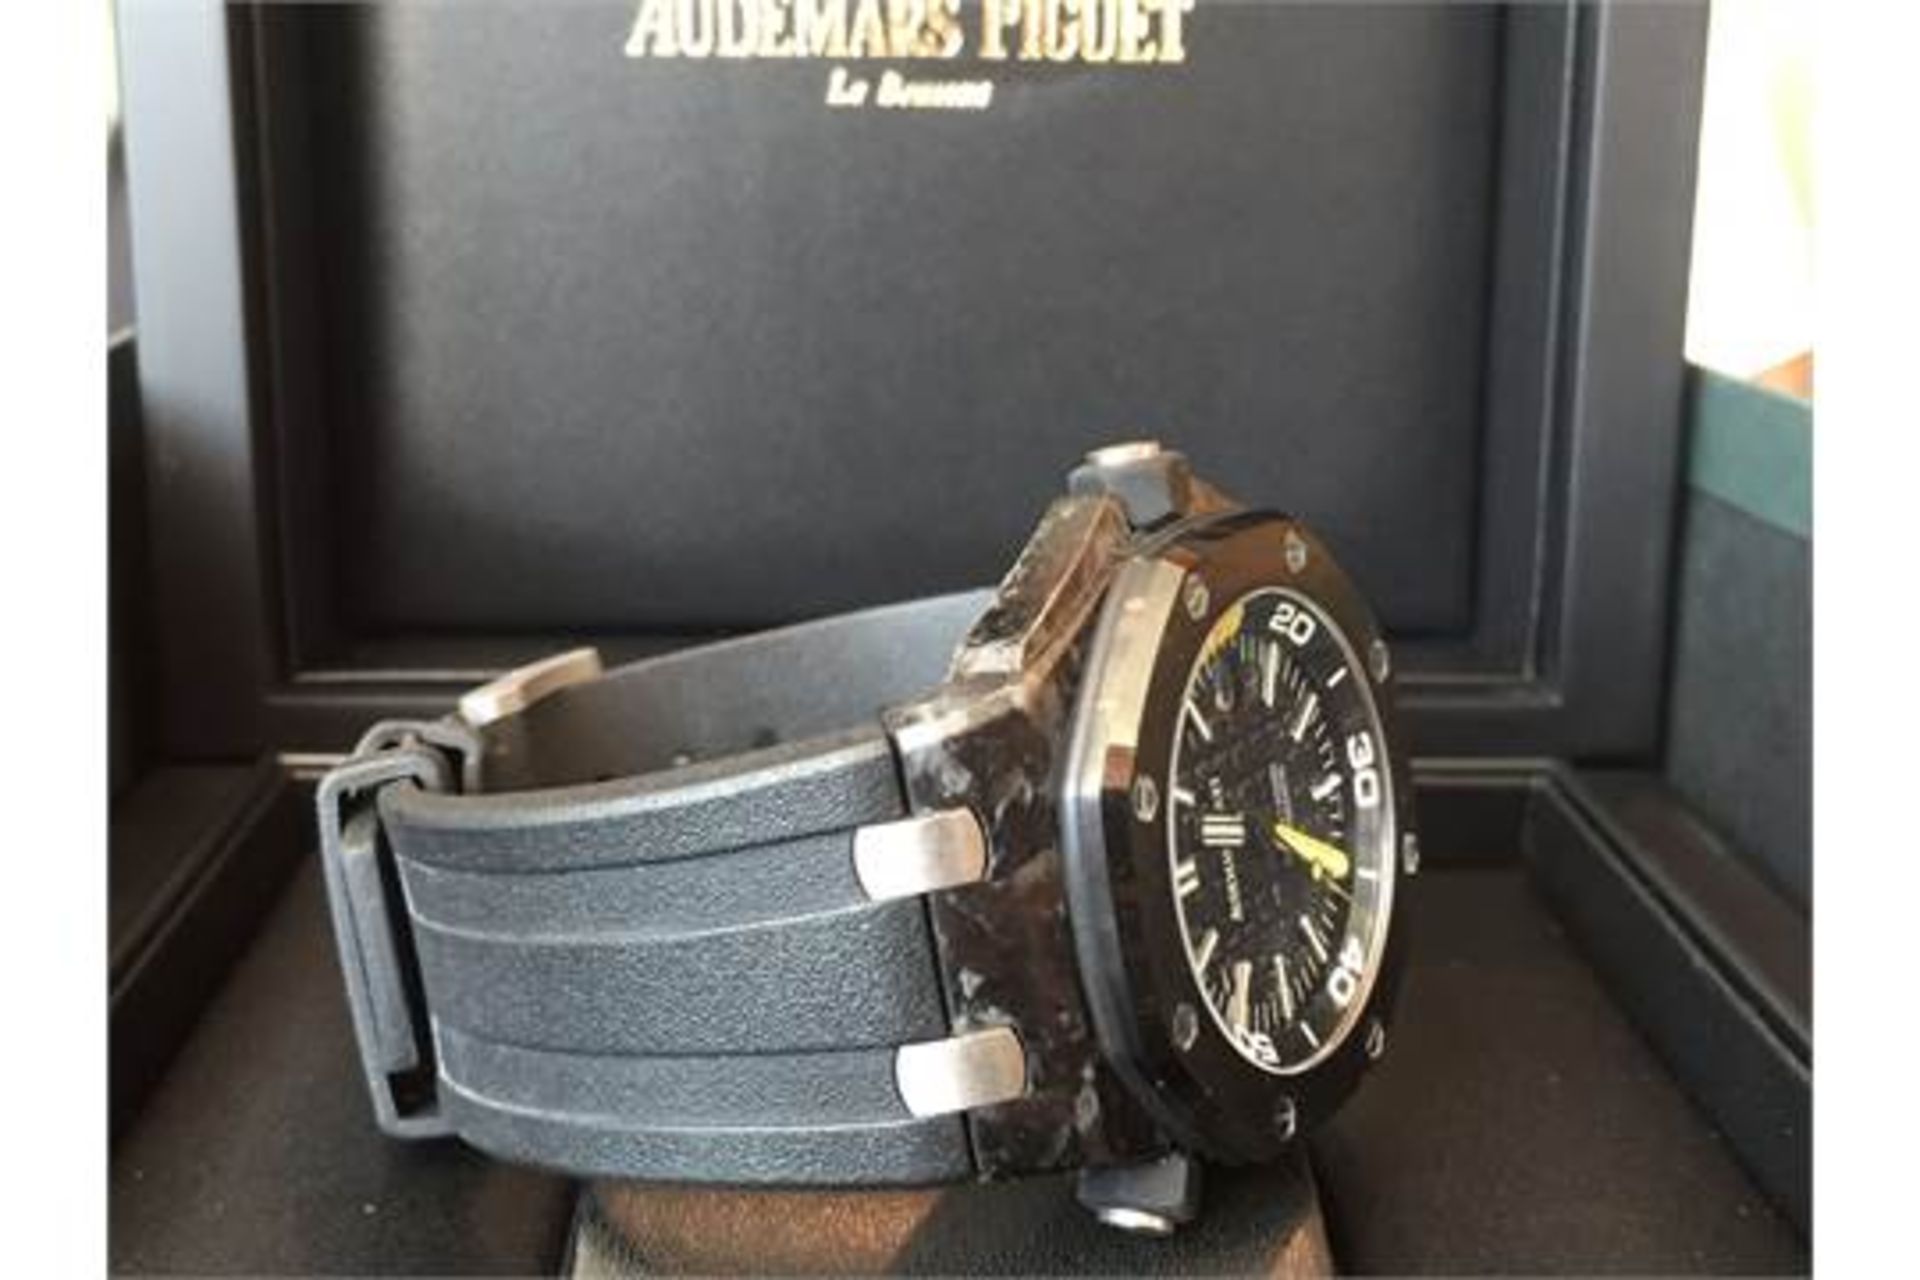 RRP PRROX £19,000 2014 AUDEMARS PIGUET ROYAL OAK OFF SHORE 44ml CERAMIC MODEL WITH BOX & PAPERS ON - Image 5 of 9